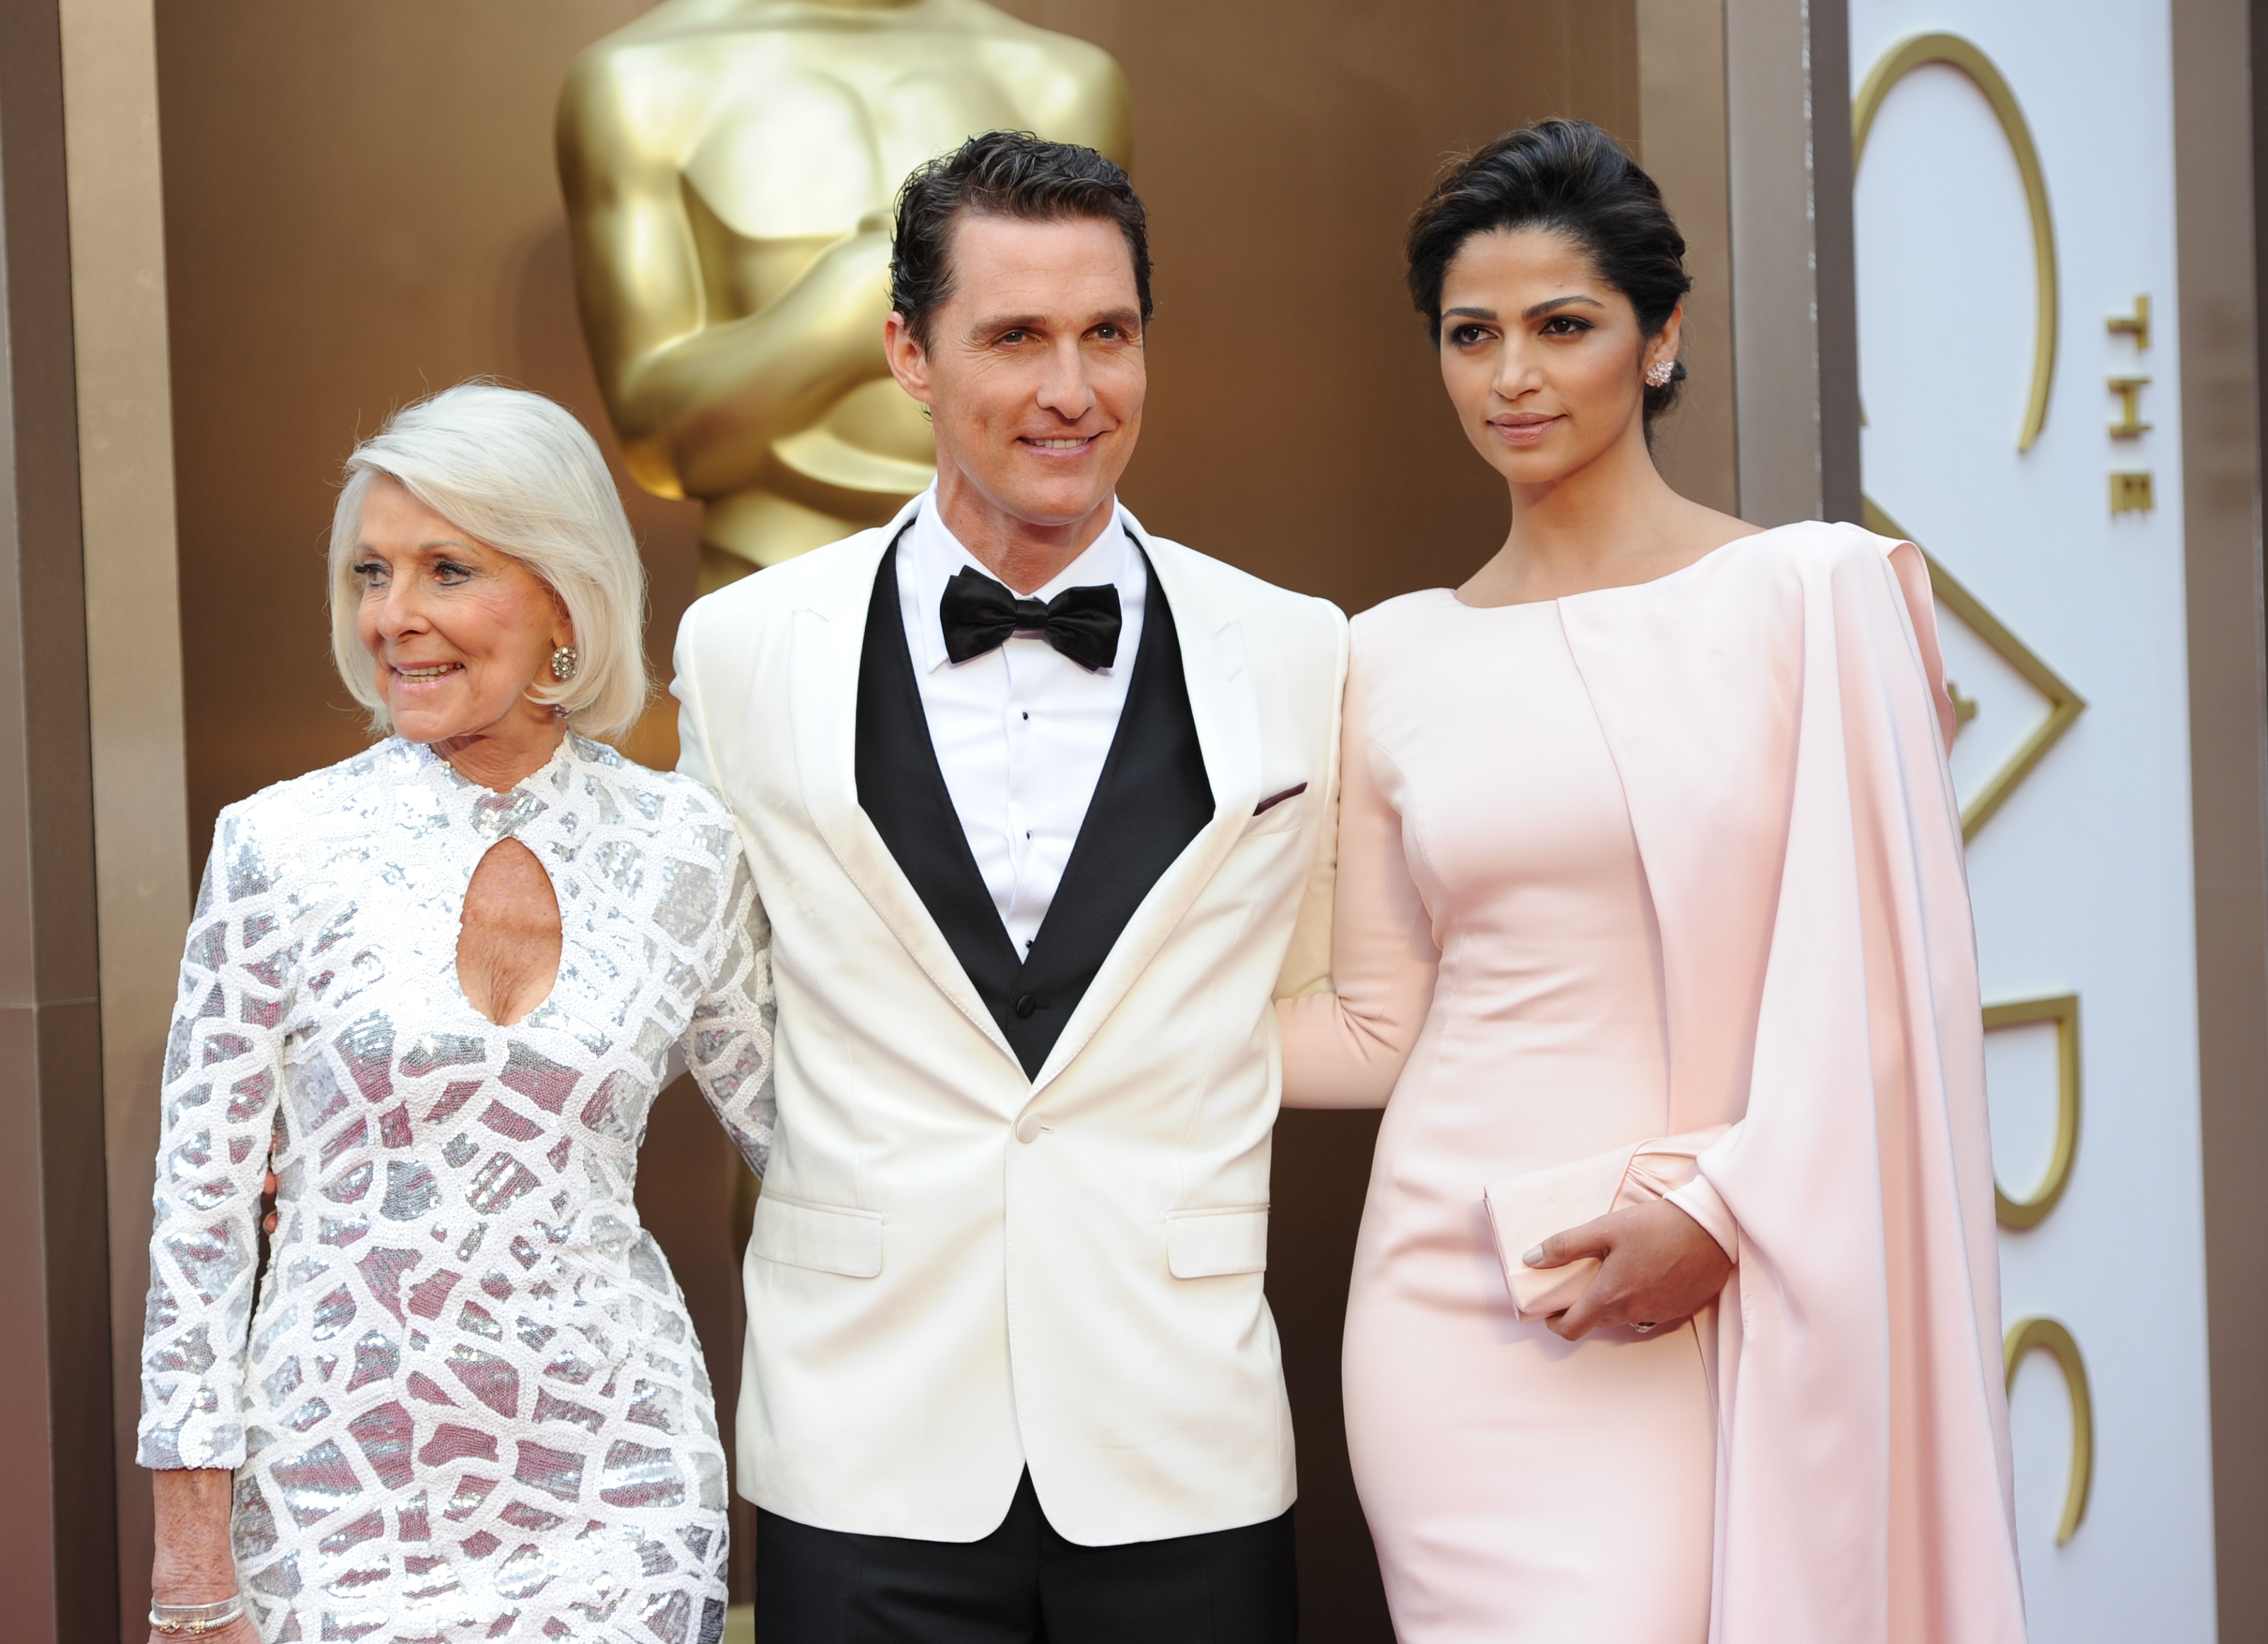 Matthew McConaughey with mom and wife at the Oscars